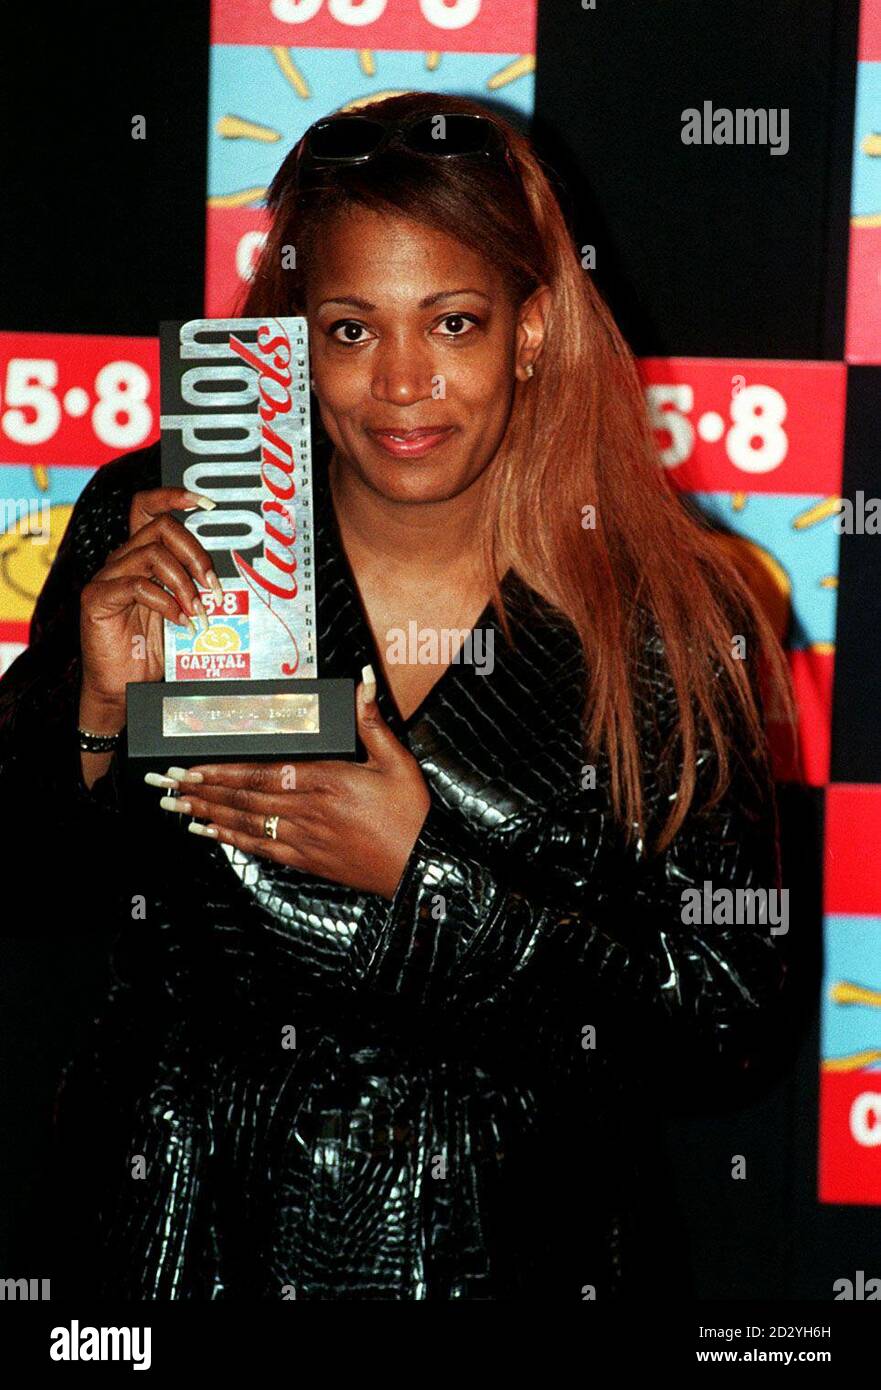 PA NEWS PHOTO 8/4/98 Singer Lutricia McNeal with the Capital Radio 95.8  Award for "Best International Newcomer" presented to her at the Royal  Lancaster Hotel in London this afternoon (Wednesday). Photo by